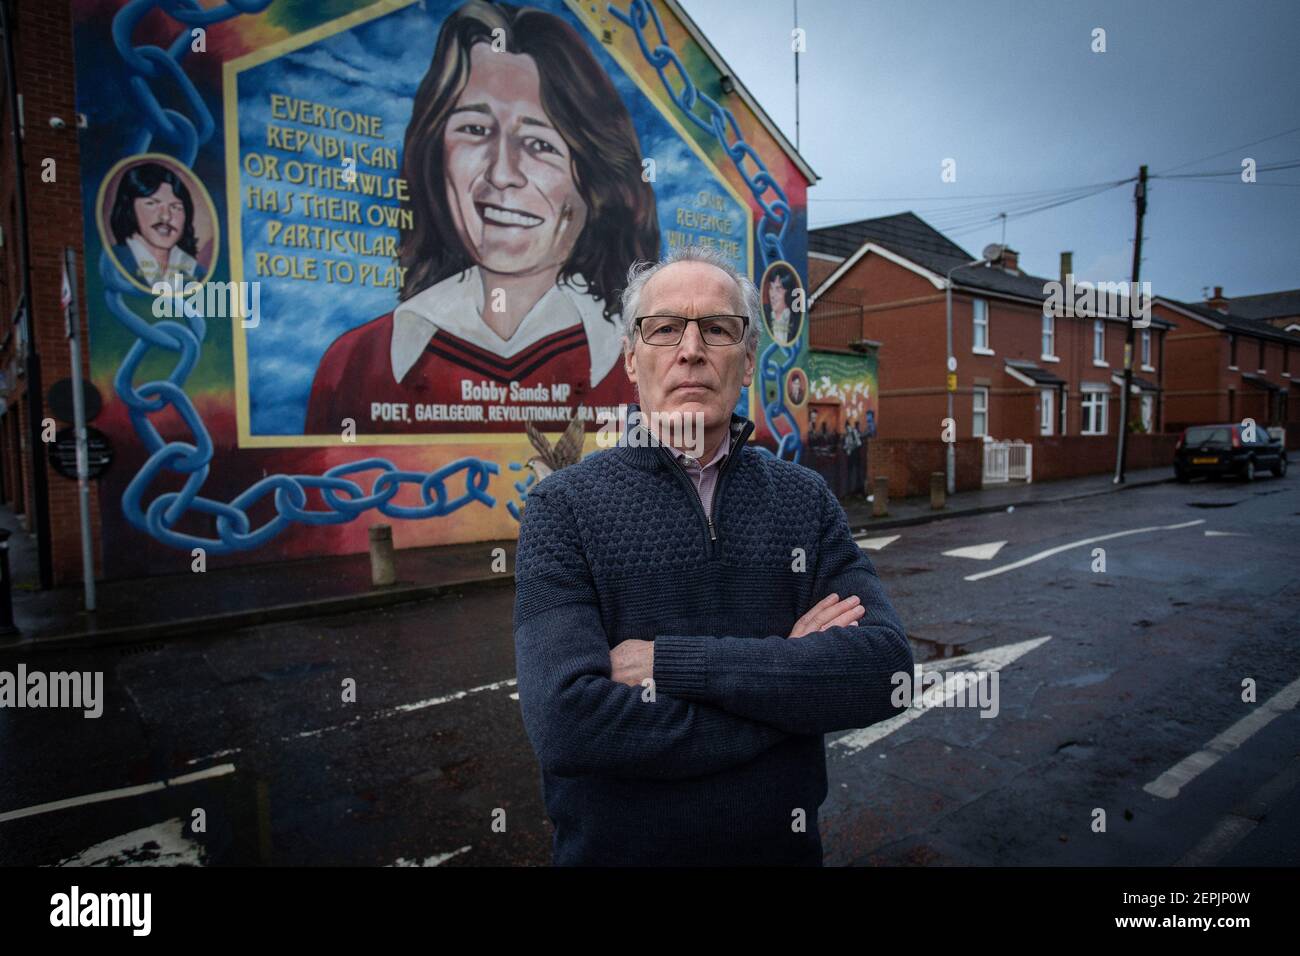 BELFAST, NORTHERN IRELAND - February, 23 Gerry Kelly in front of the Bobby Sands mural  at Sinn Fein headquarters  receive call  regarding  bomb alert Stock Photo